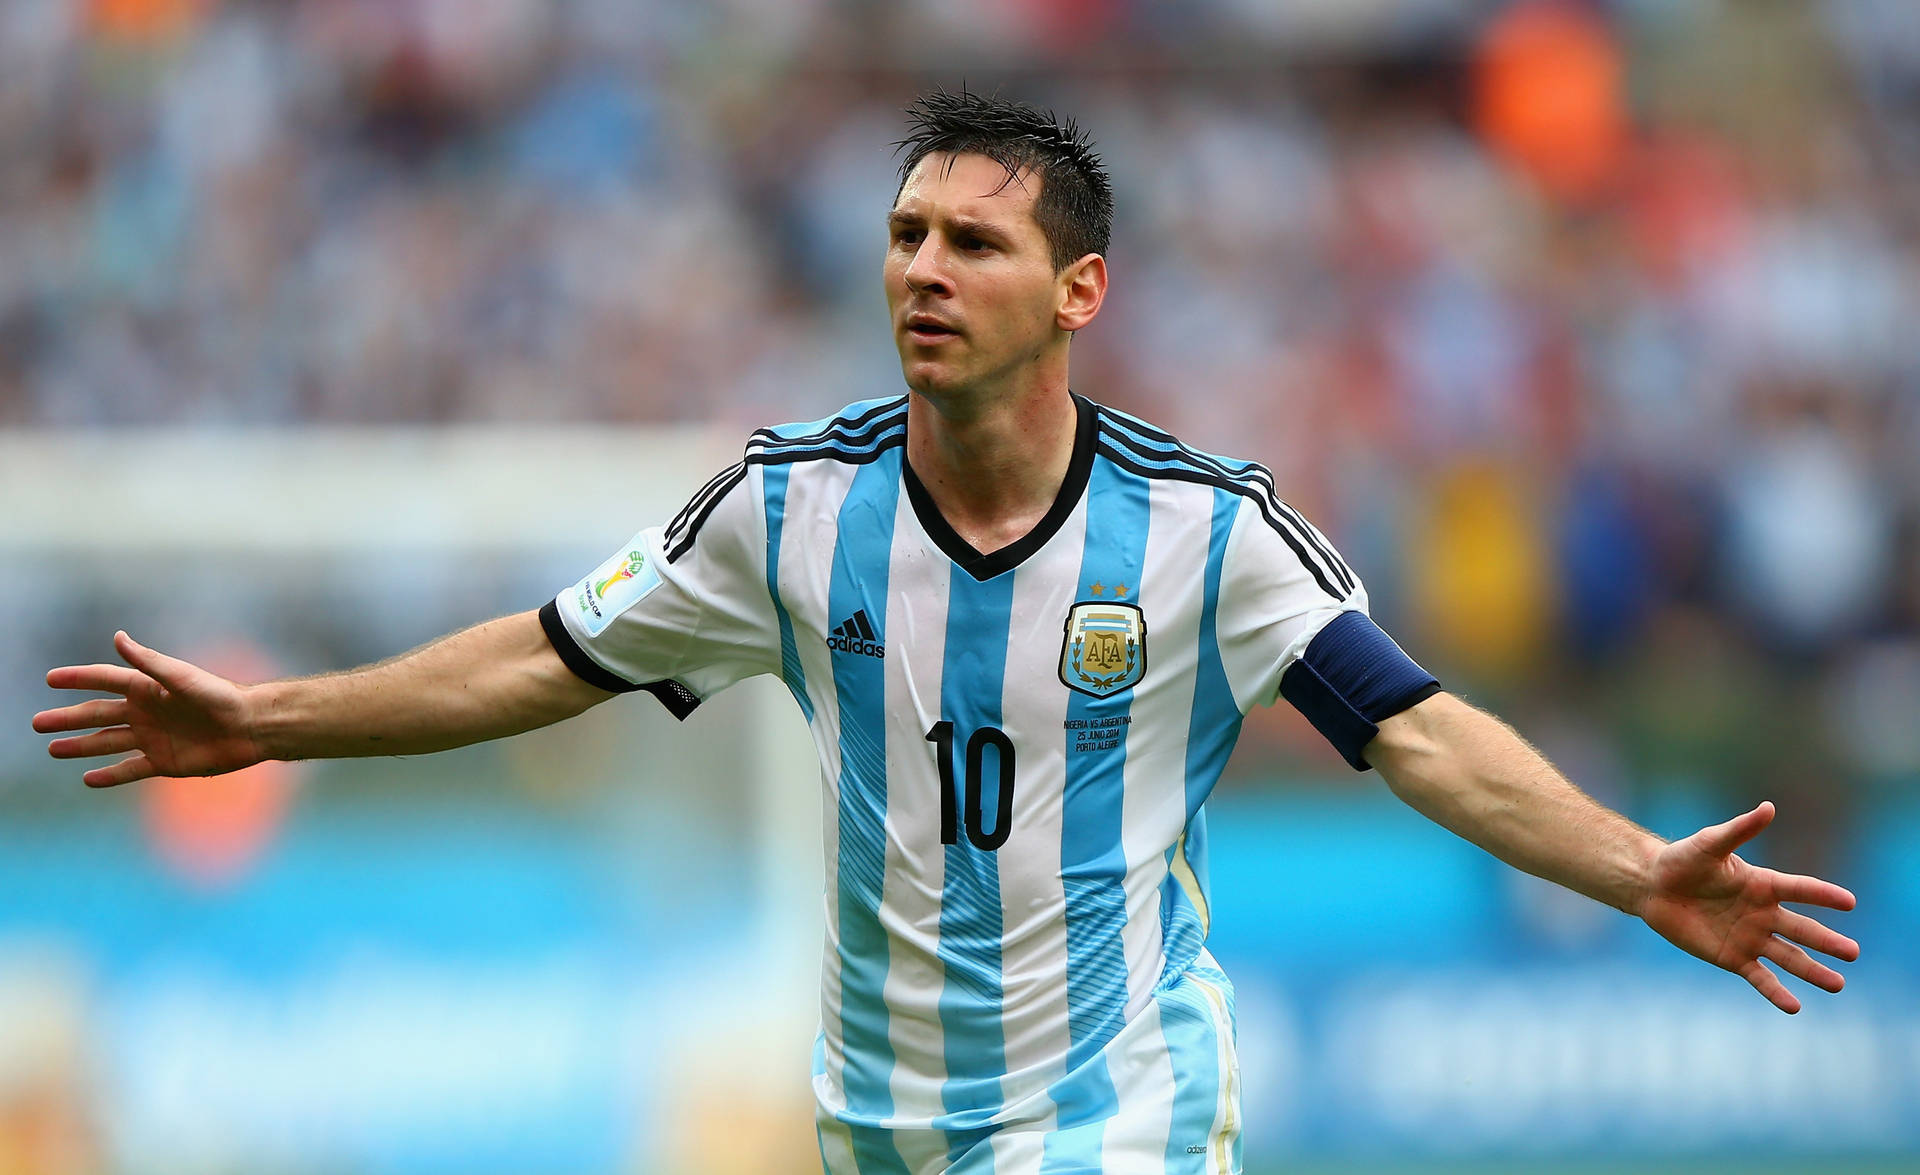 Lionel Messi In Striped Football Jersey